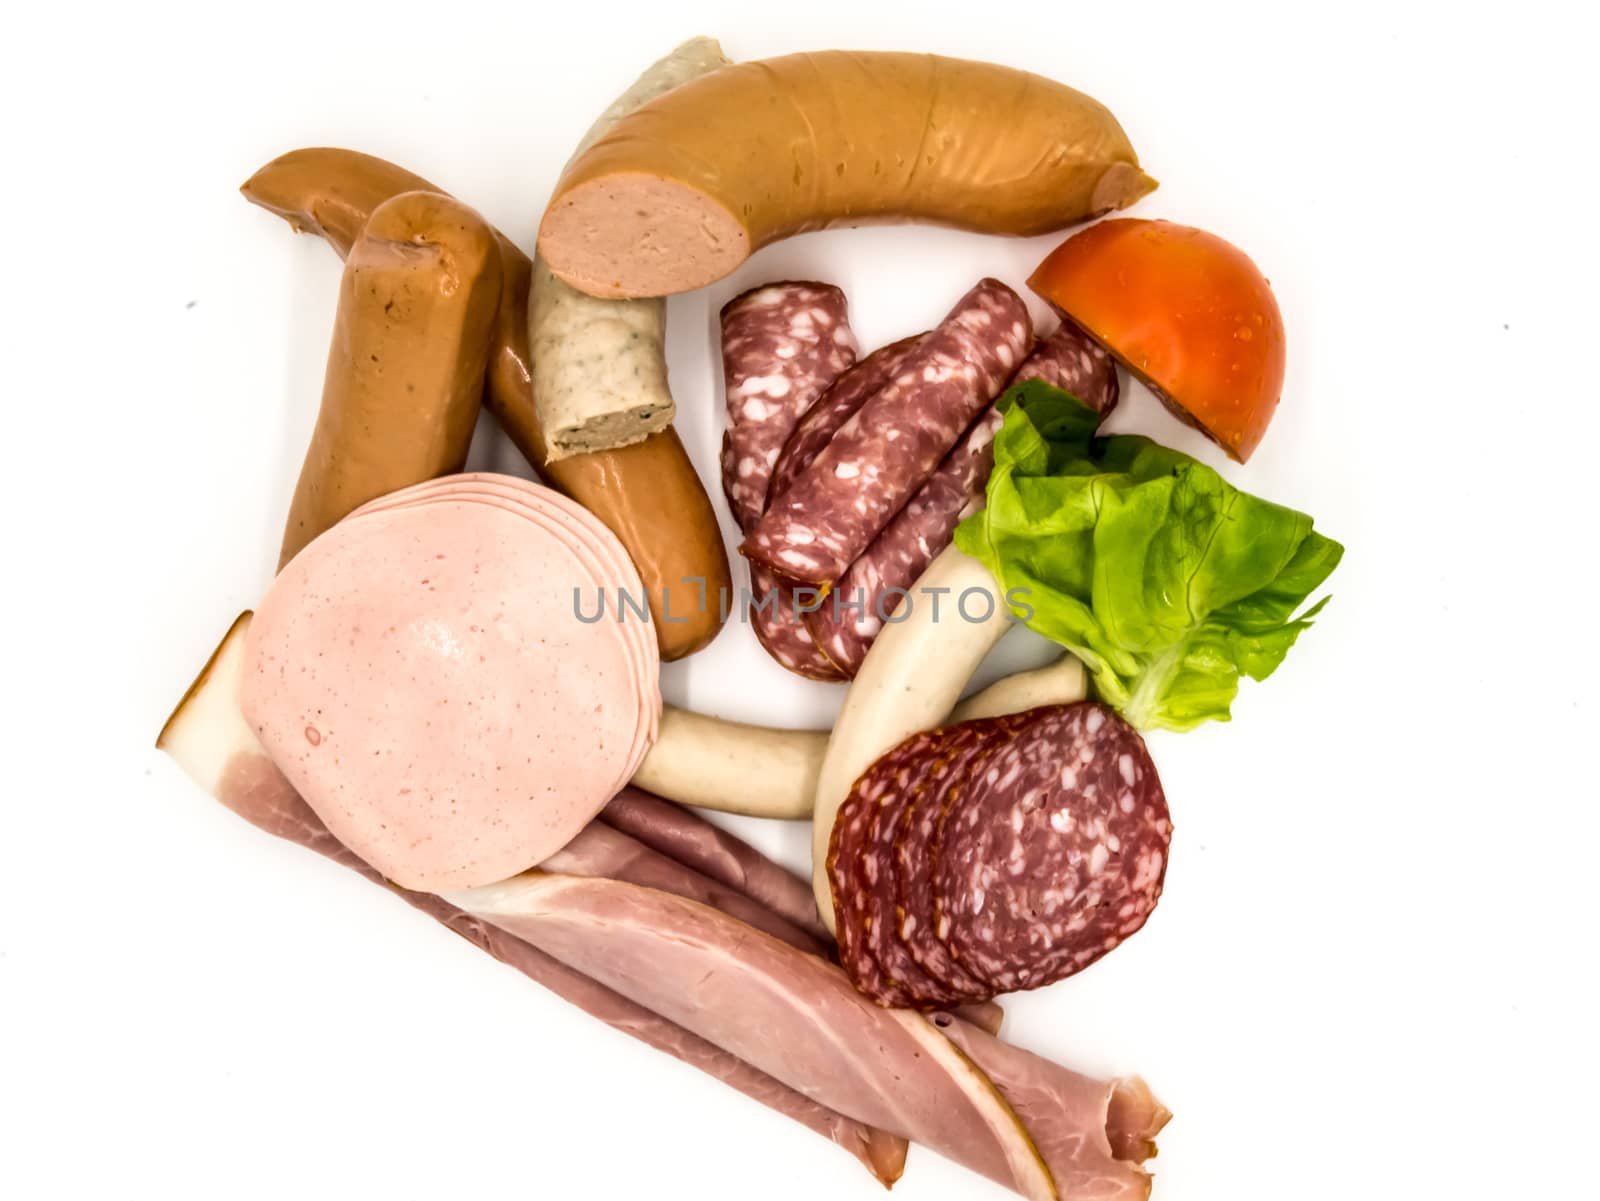 Different kinds of sausage and smoked bacon, top view on a white background